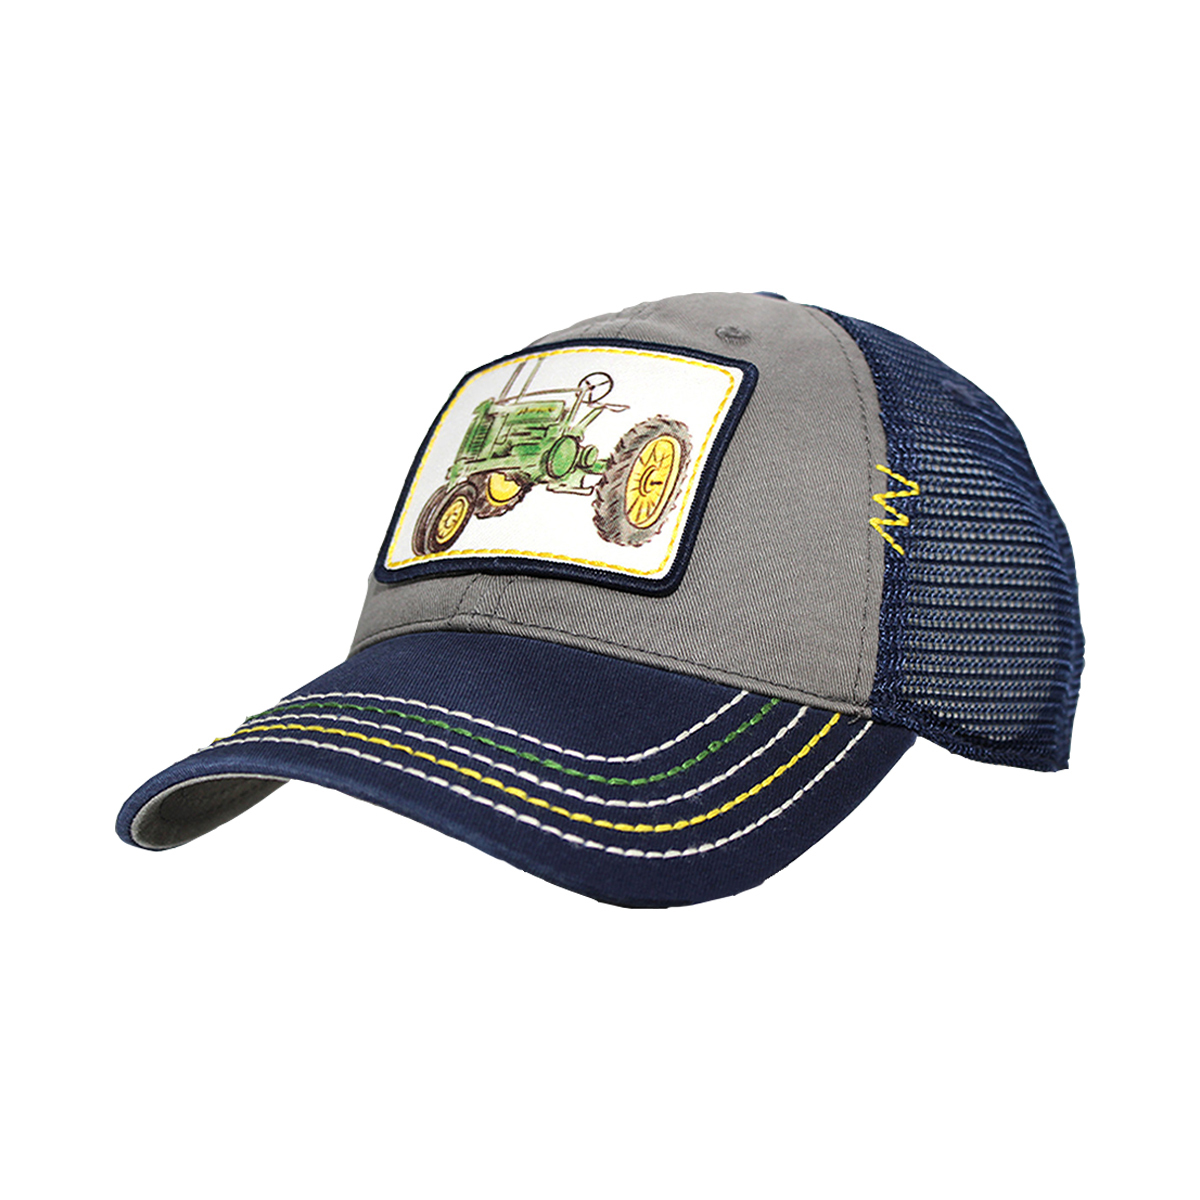 Do Good Today Tractor Sketch Adult Hat